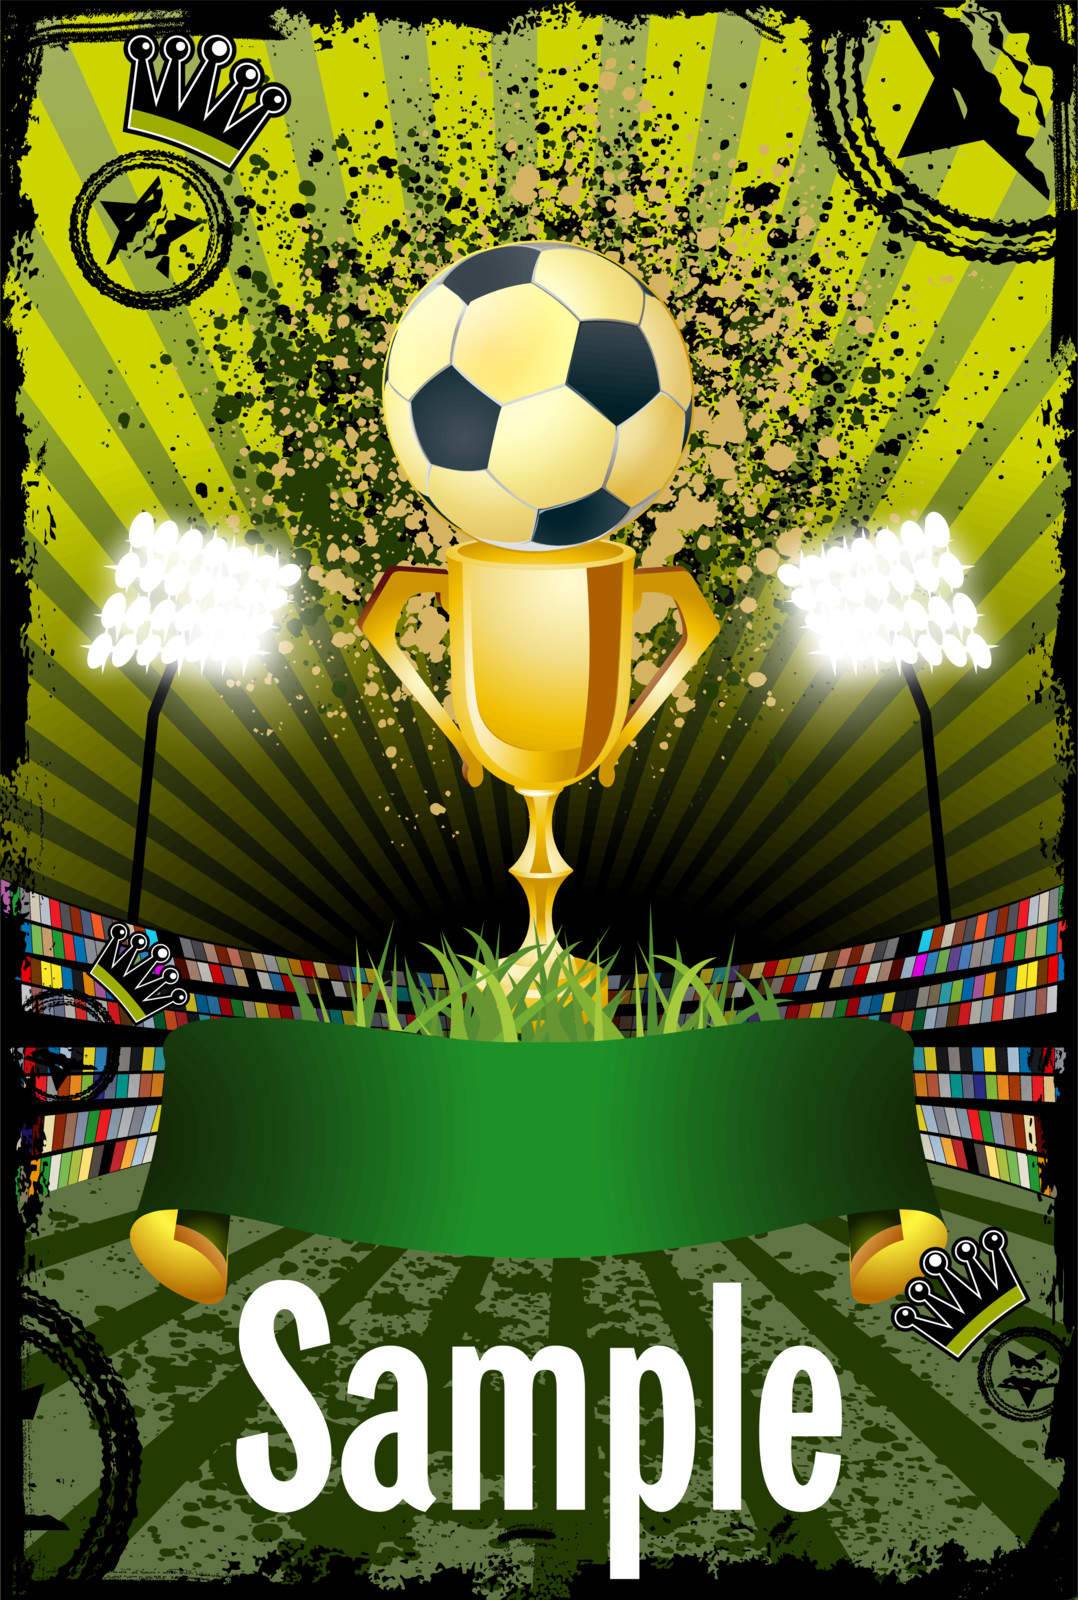 Football poster with copyspace by Petrov_Vladimir